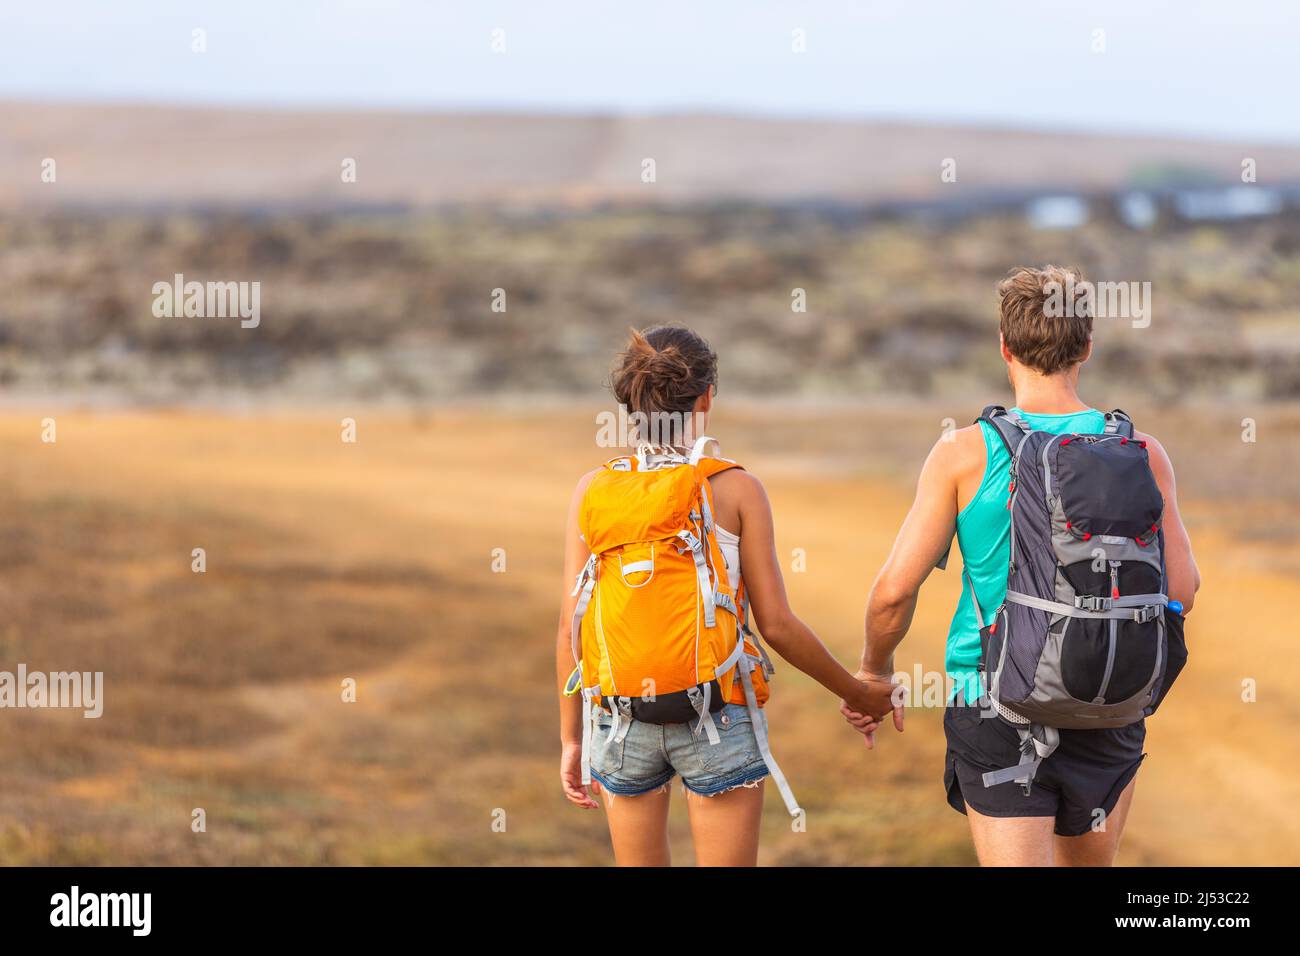 Hikers couple tourists walking together with backpacks holding hands walking in love. Young lovers travelers on travel adventure trek hike wanderlust Stock Photo